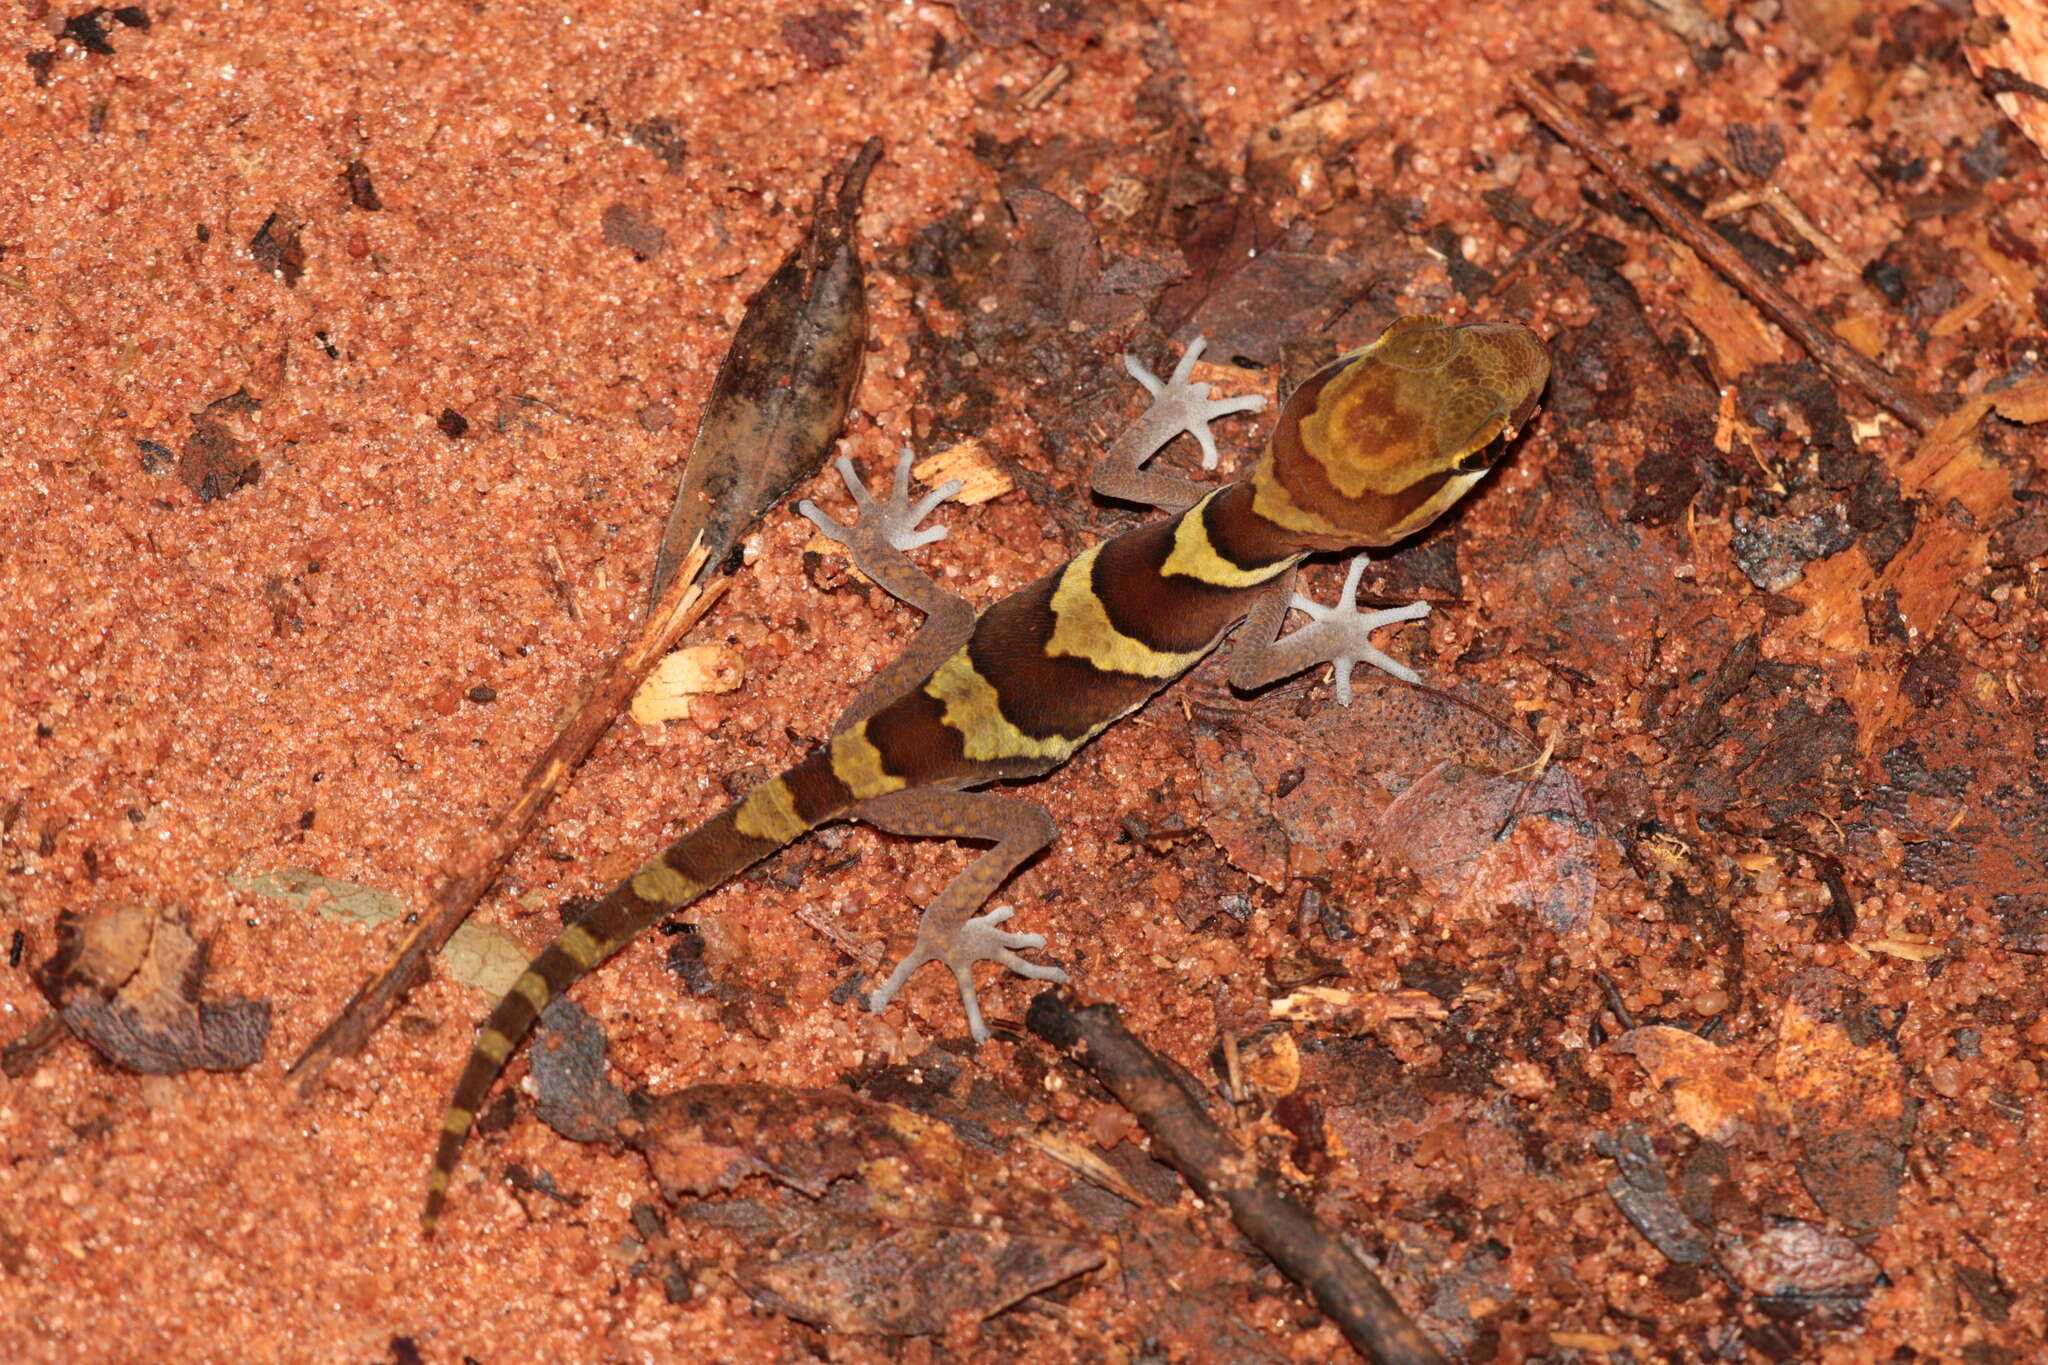 Image of Panther Gecko